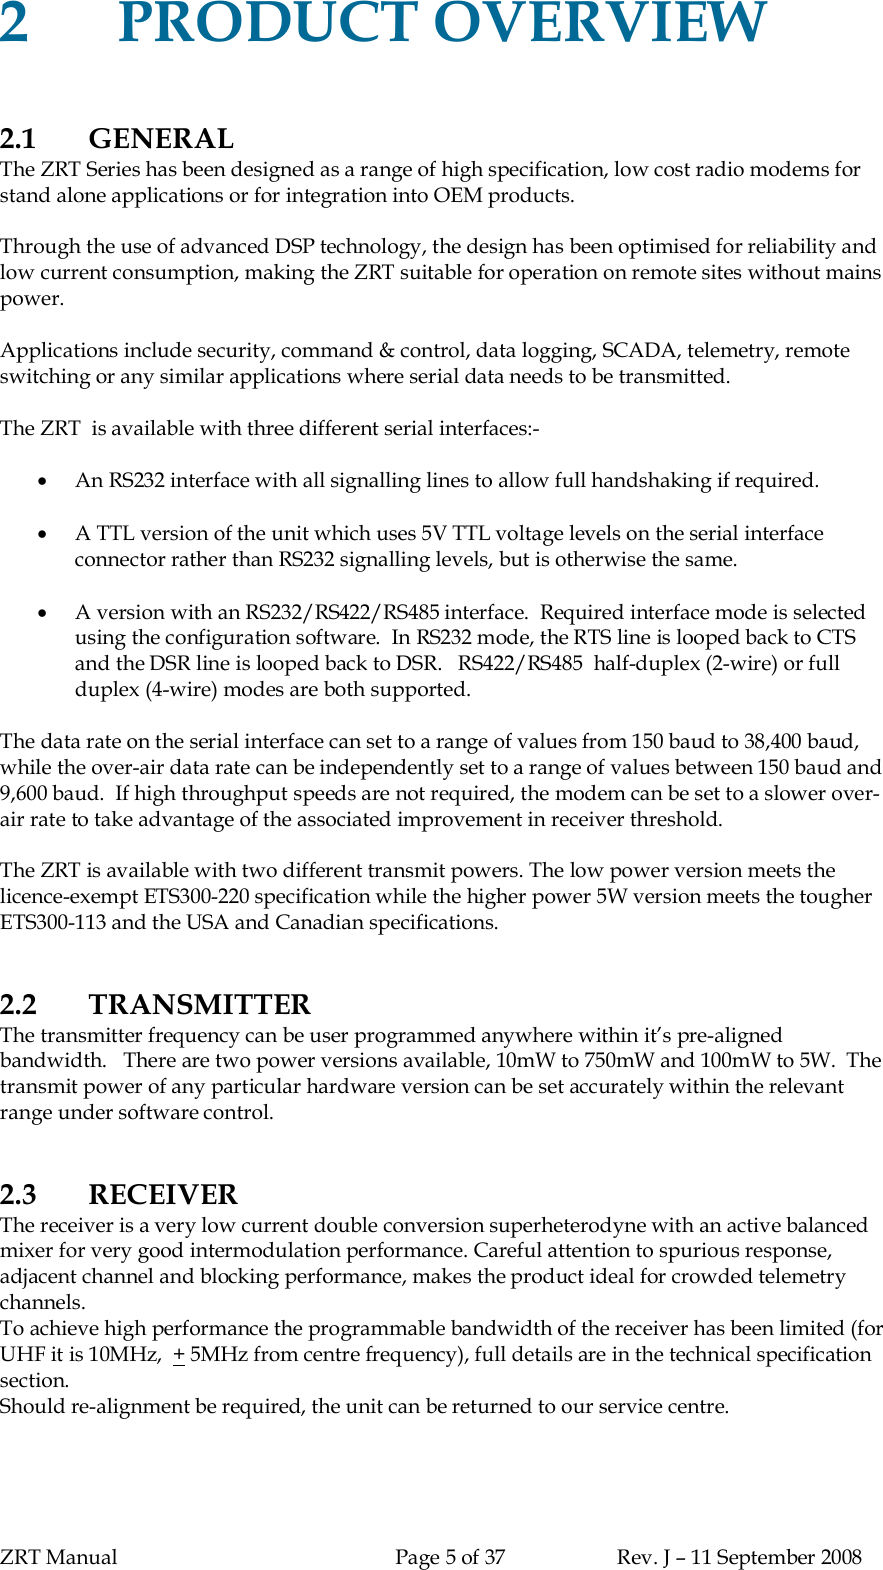 ZRT Manual Page 5 of 37 Rev. J – 11 September 20082PRODUCT OVERVIEW2.1 GENERALThe ZRT Series has been designed as a range of high specification, low cost radio modems forstand alone applications or for integration into OEM products.Through the use of advanced DSP technology, the design has been optimised for reliability andlow current consumption, making the ZRT suitable for operation on remote sites without mainspower.Applications include security, command &amp; control, data logging, SCADA, telemetry, remoteswitching or any similar applications where serial data needs to be transmitted.The ZRT  is available with three different serial interfaces:-An RS232 interface with all signalling lines to allow full handshaking if required.A TTL version of the unit which uses 5V TTL voltage levels on the serial interfaceconnector rather than RS232 signalling levels, but is otherwise the same.A version with an RS232/RS422/RS485 interface.  Required interface mode is selectedusing the configuration software.  In RS232 mode, the RTS line is looped back to CTSand the DSR line is looped back to DSR.   RS422/RS485  half-duplex (2-wire) or fullduplex (4-wire) modes are both supported.The data rate on the serial interface can set to a range of values from 150 baud to 38,400 baud,while the over-air data rate can be independently set to a range of values between 150 baud and9,600 baud.  If high throughput speeds are not required, the modem can be set to a slower over-air rate to take advantage of the associated improvement in receiver threshold.The ZRT is available with two different transmit powers. The low power version meets thelicence-exempt ETS300-220 specification while the higher power 5W version meets the tougherETS300-113 and the USA and Canadian specifications.2.2 TRANSMITTERThe transmitter frequency can be user programmed anywhere within it’s pre-alignedbandwidth.   There are two power versions available, 10mW to 750mW and 100mW to 5W.  Thetransmit power of any particular hardware version can be set accurately within the relevantrange under software control.2.3 RECEIVERThe receiver is a very low current double conversion superheterodyne with an active balancedmixer for very good intermodulation performance. Careful attention to spurious response,adjacent channel and blocking performance, makes the product ideal for crowded telemetrychannels.To achieve high performance the programmable bandwidth of the receiver has been limited (forUHF it is 10MHz,  + 5MHz from centre frequency), full details are in the technical specificationsection.Should re-alignment be required, the unit can be returned to our service centre.